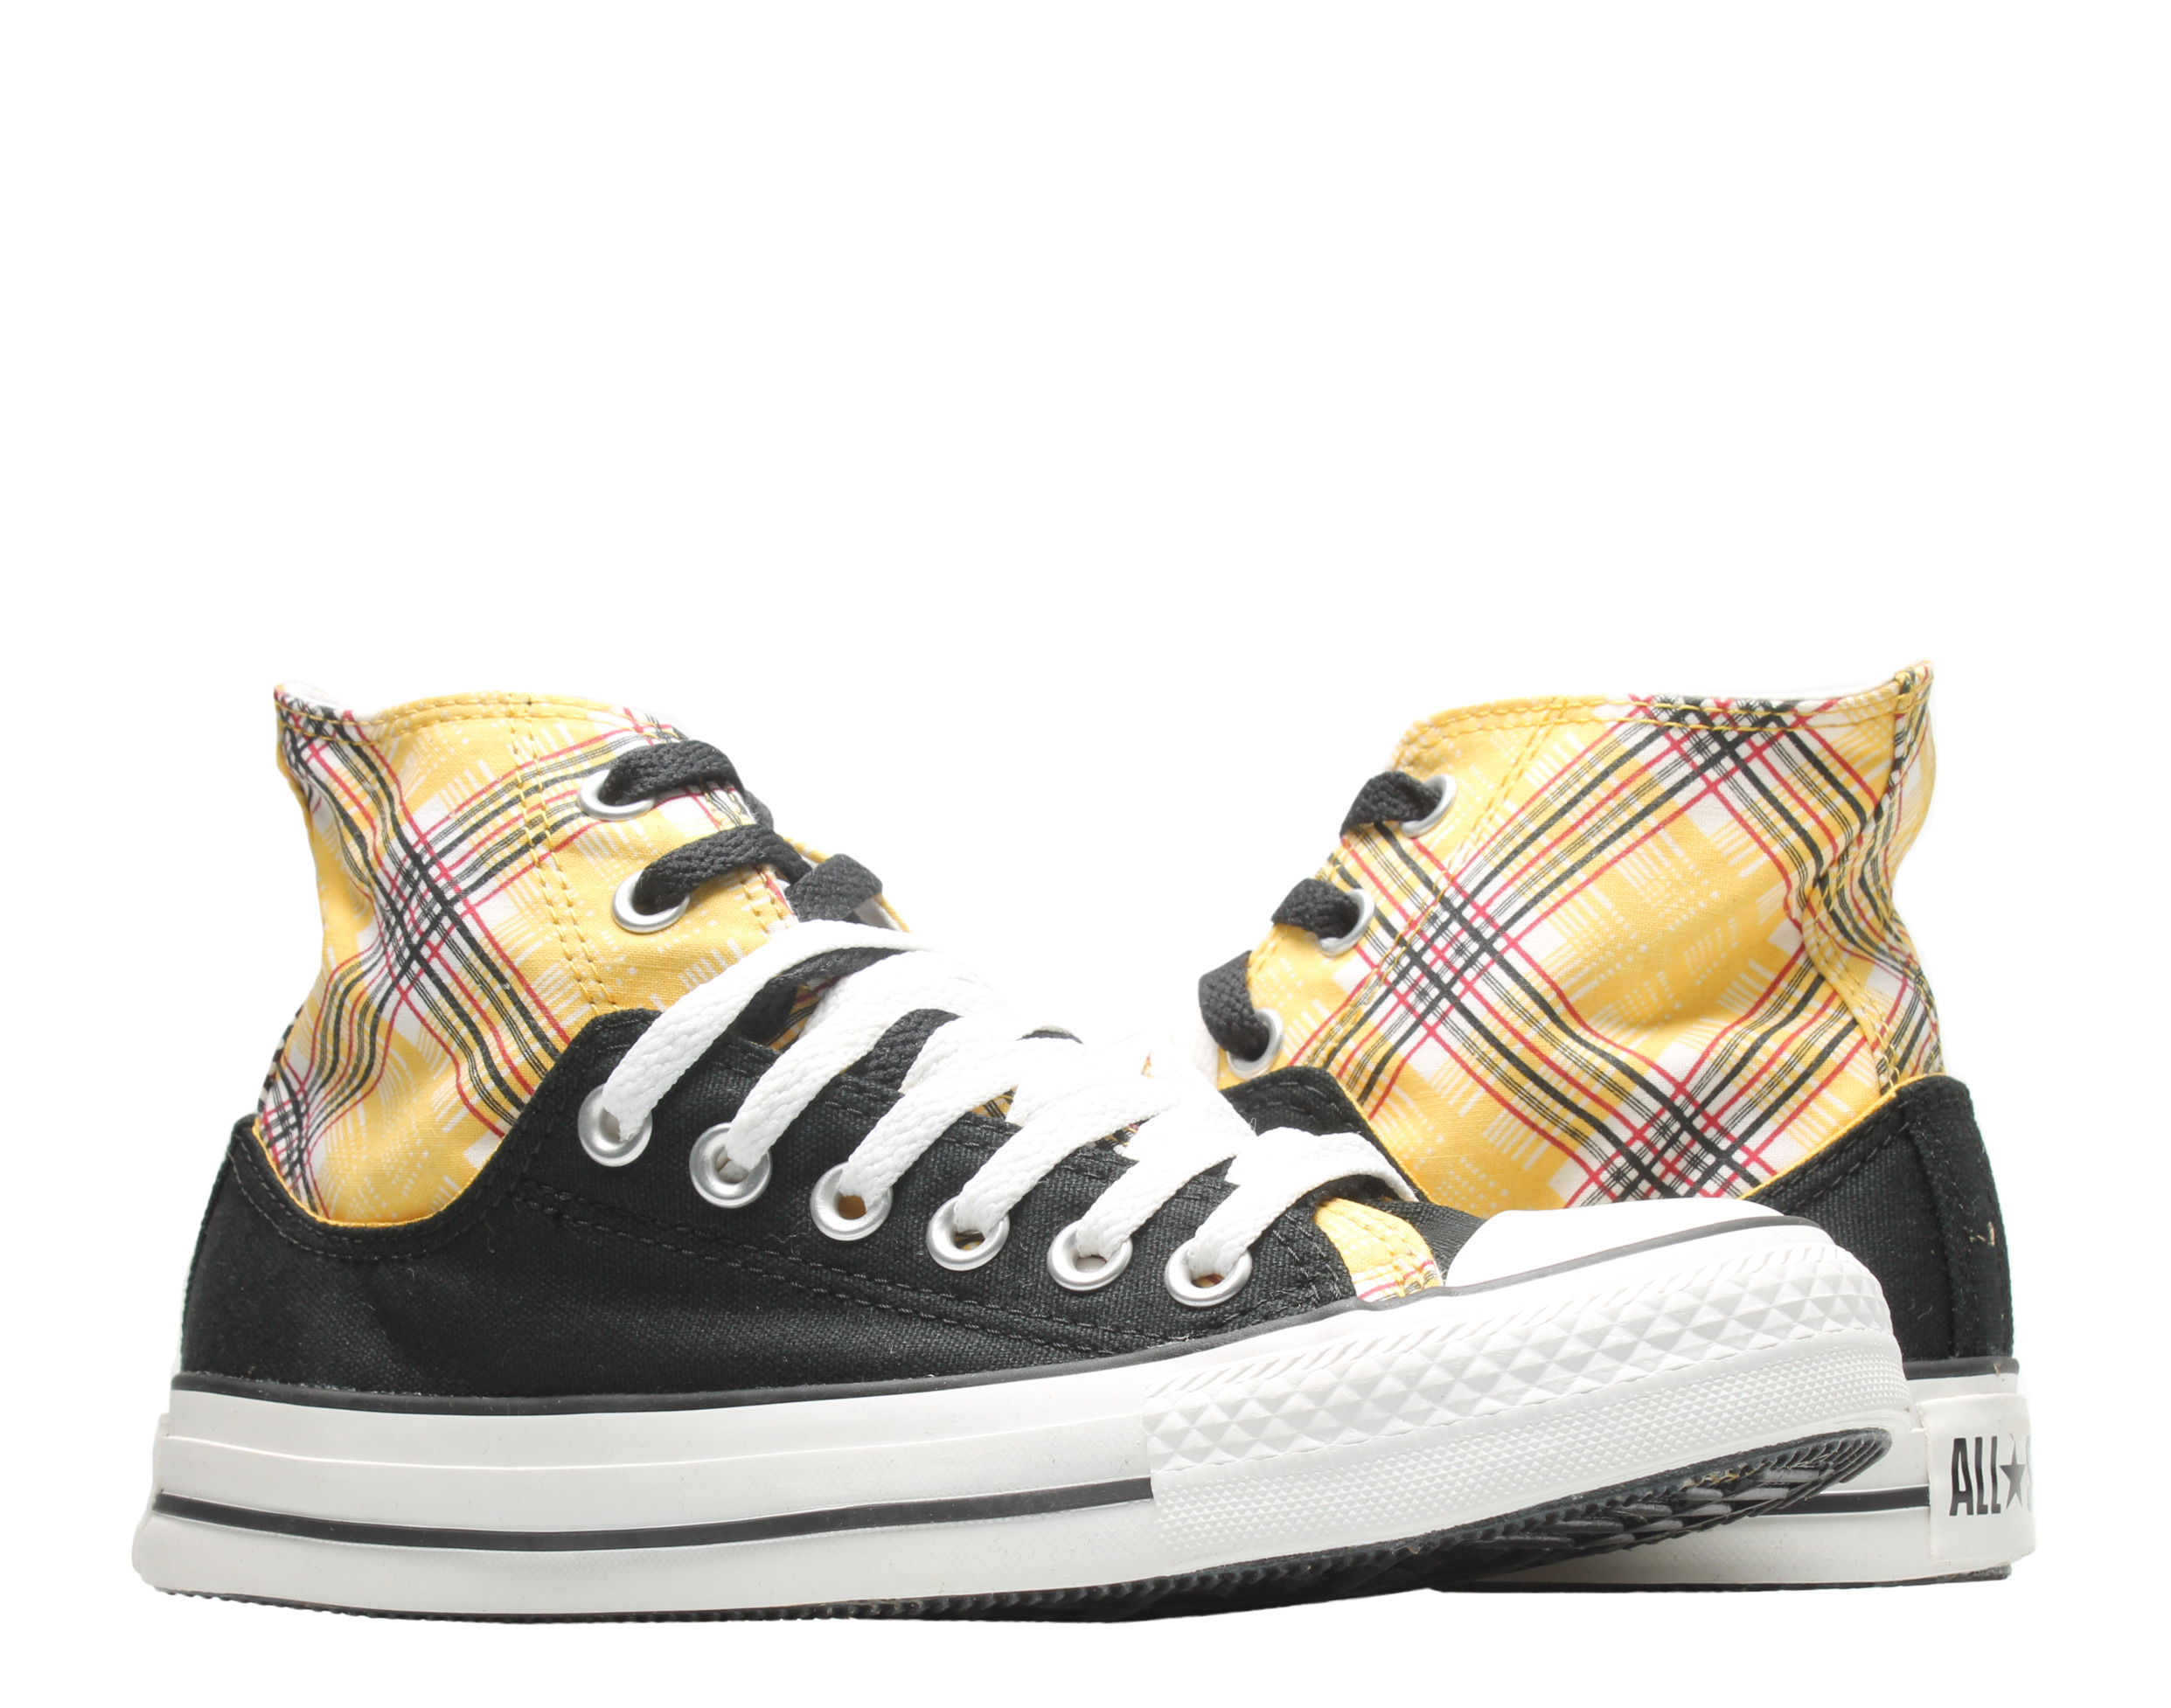 Converse Chuck Taylor All Star Layer Up Plaid Yellow/Black Hi Sneakers  514109